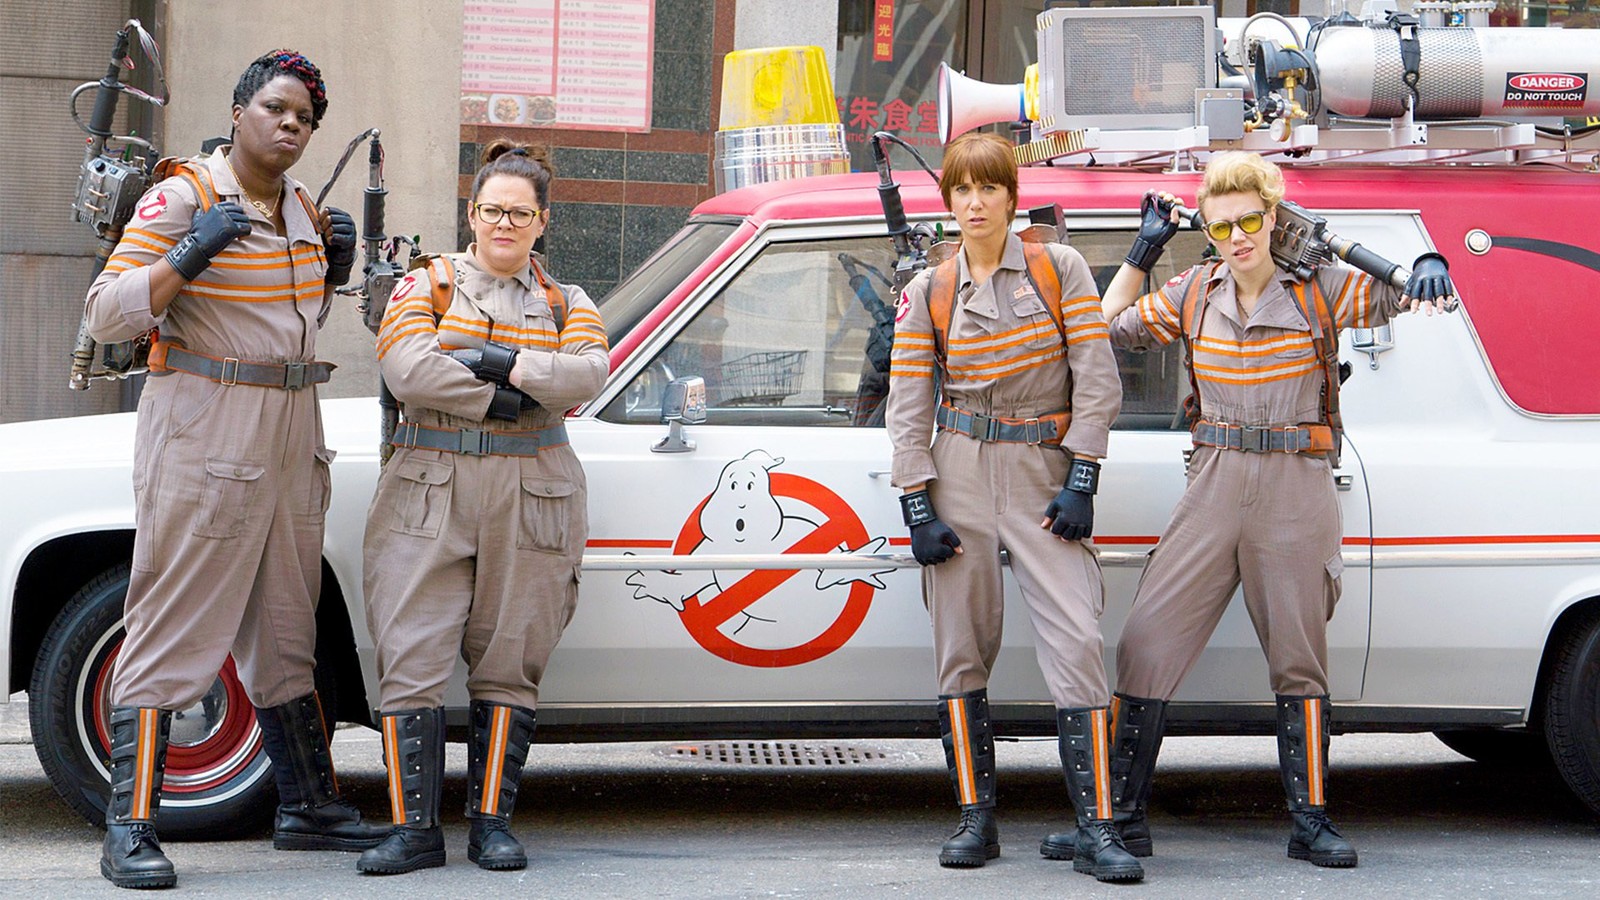 Game Based off “Ghostbusters (2016)” Announced - That's the Paul Feig Movie